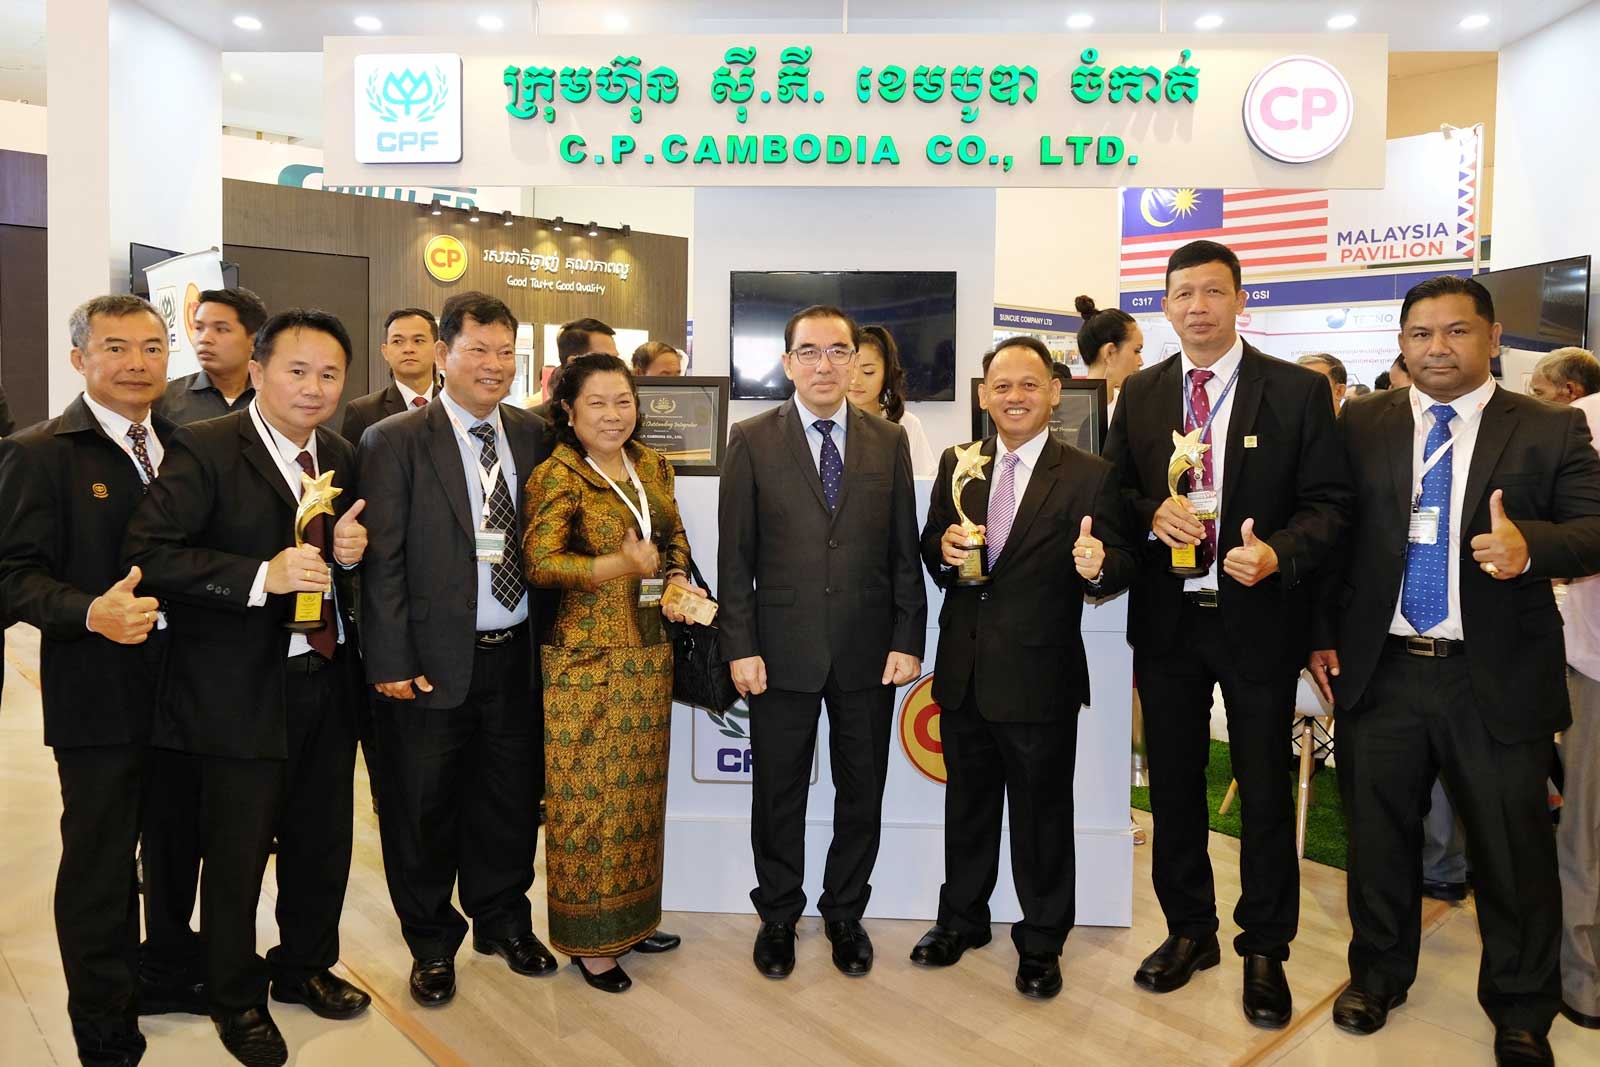 C.P. Cambodia received three outstanding awards for integrated business